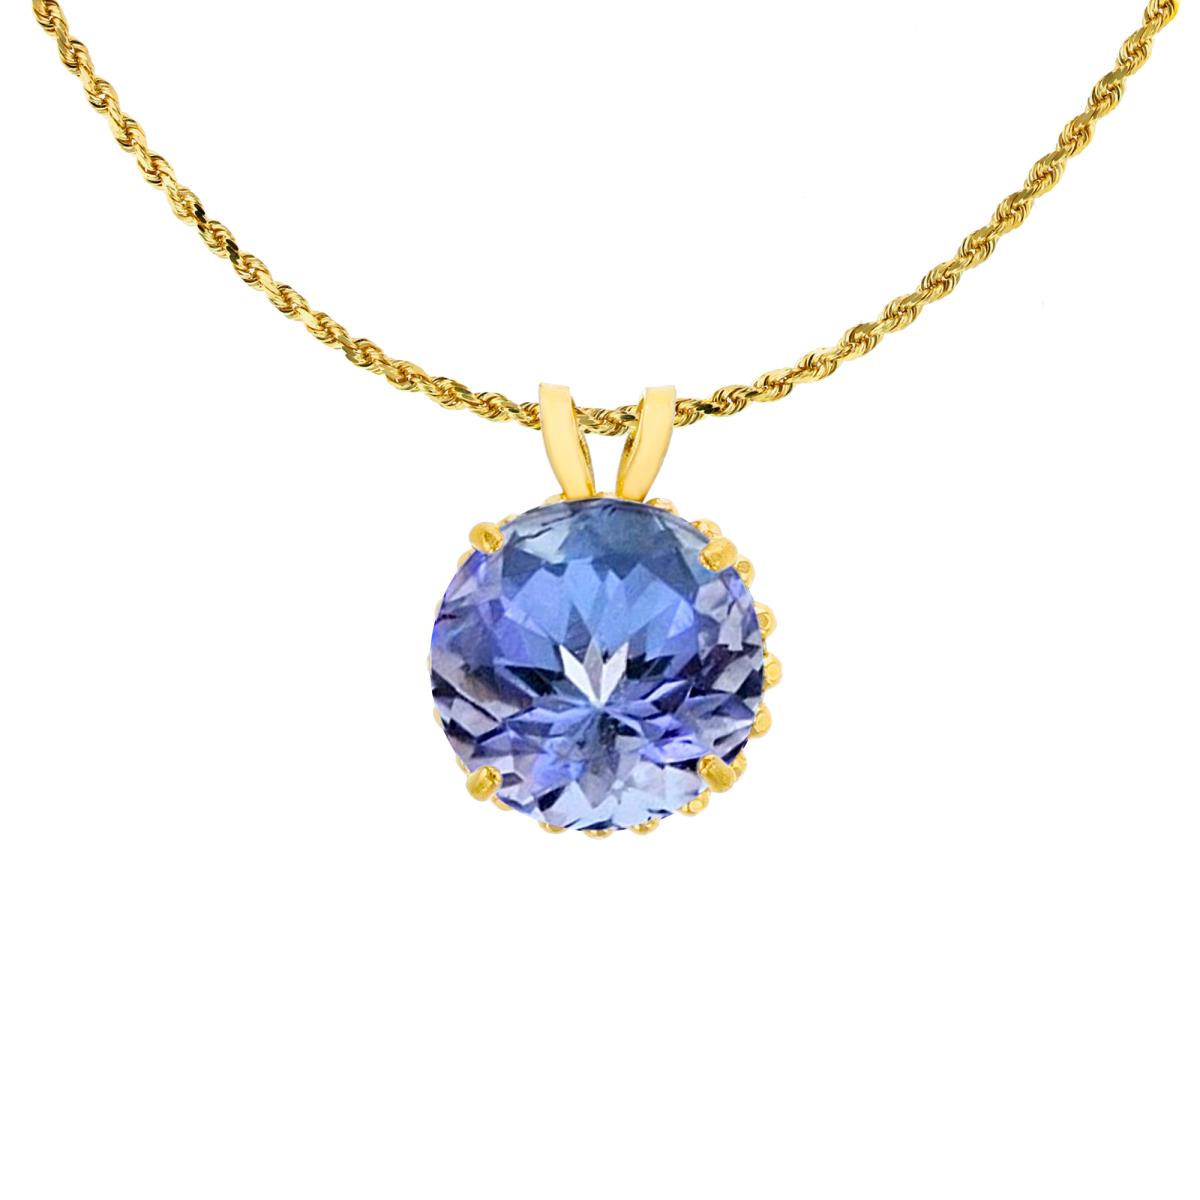 10K Yellow Gold 7mm Rd Cut Tanzanite with Bead Frame Rabbit Ear 18" Rope Chain Necklace